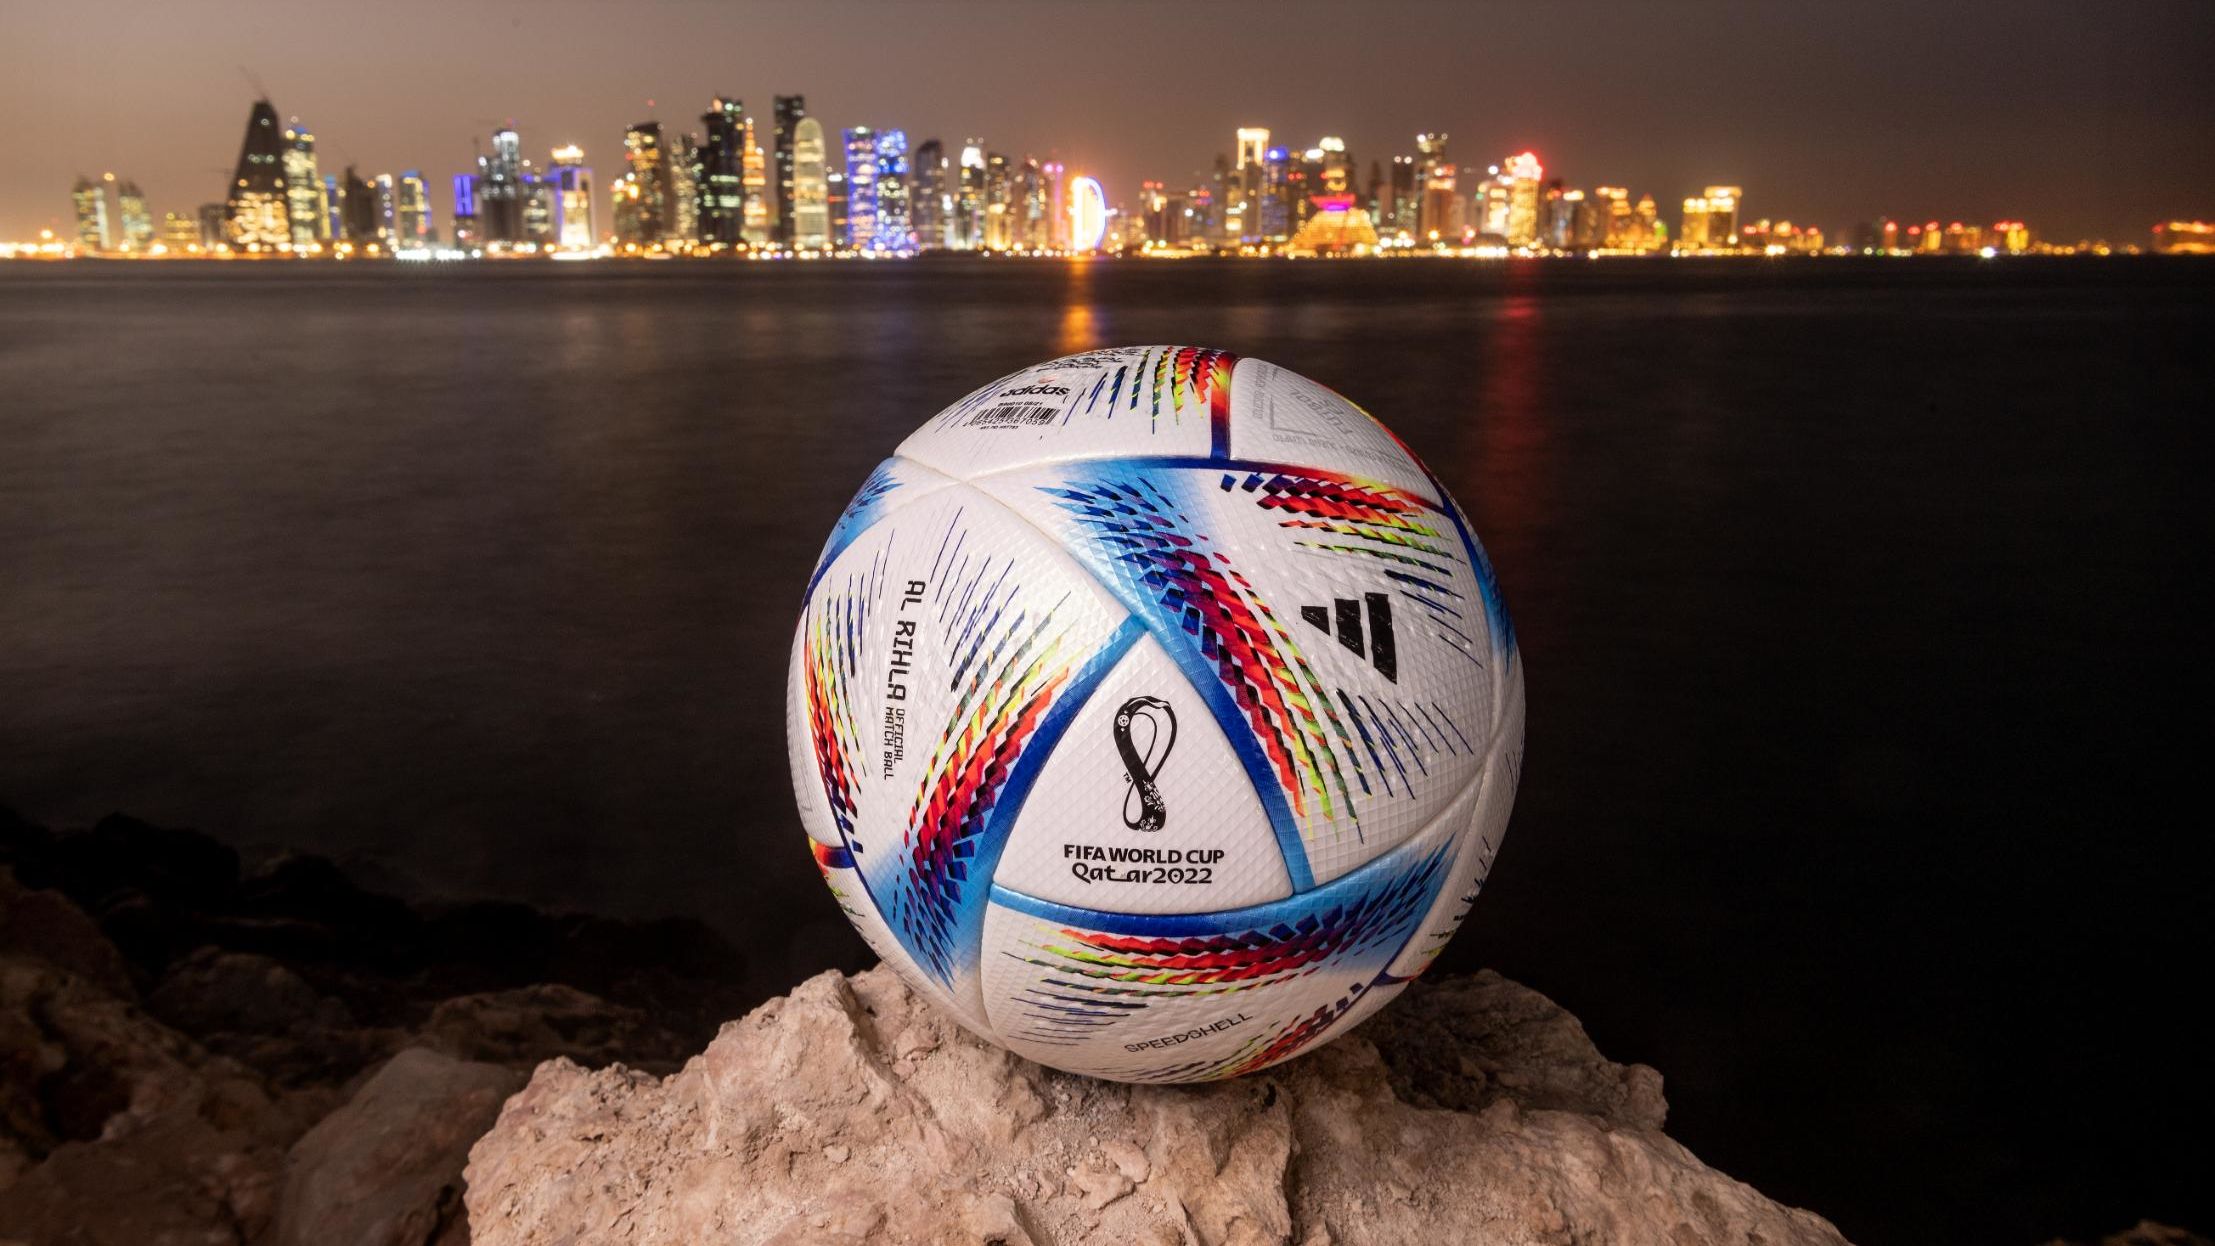 The official FIFA World Cup Qatar 2022 ball sits on display in front of the Doha skyline ahead of the World Cup draw on March 31.